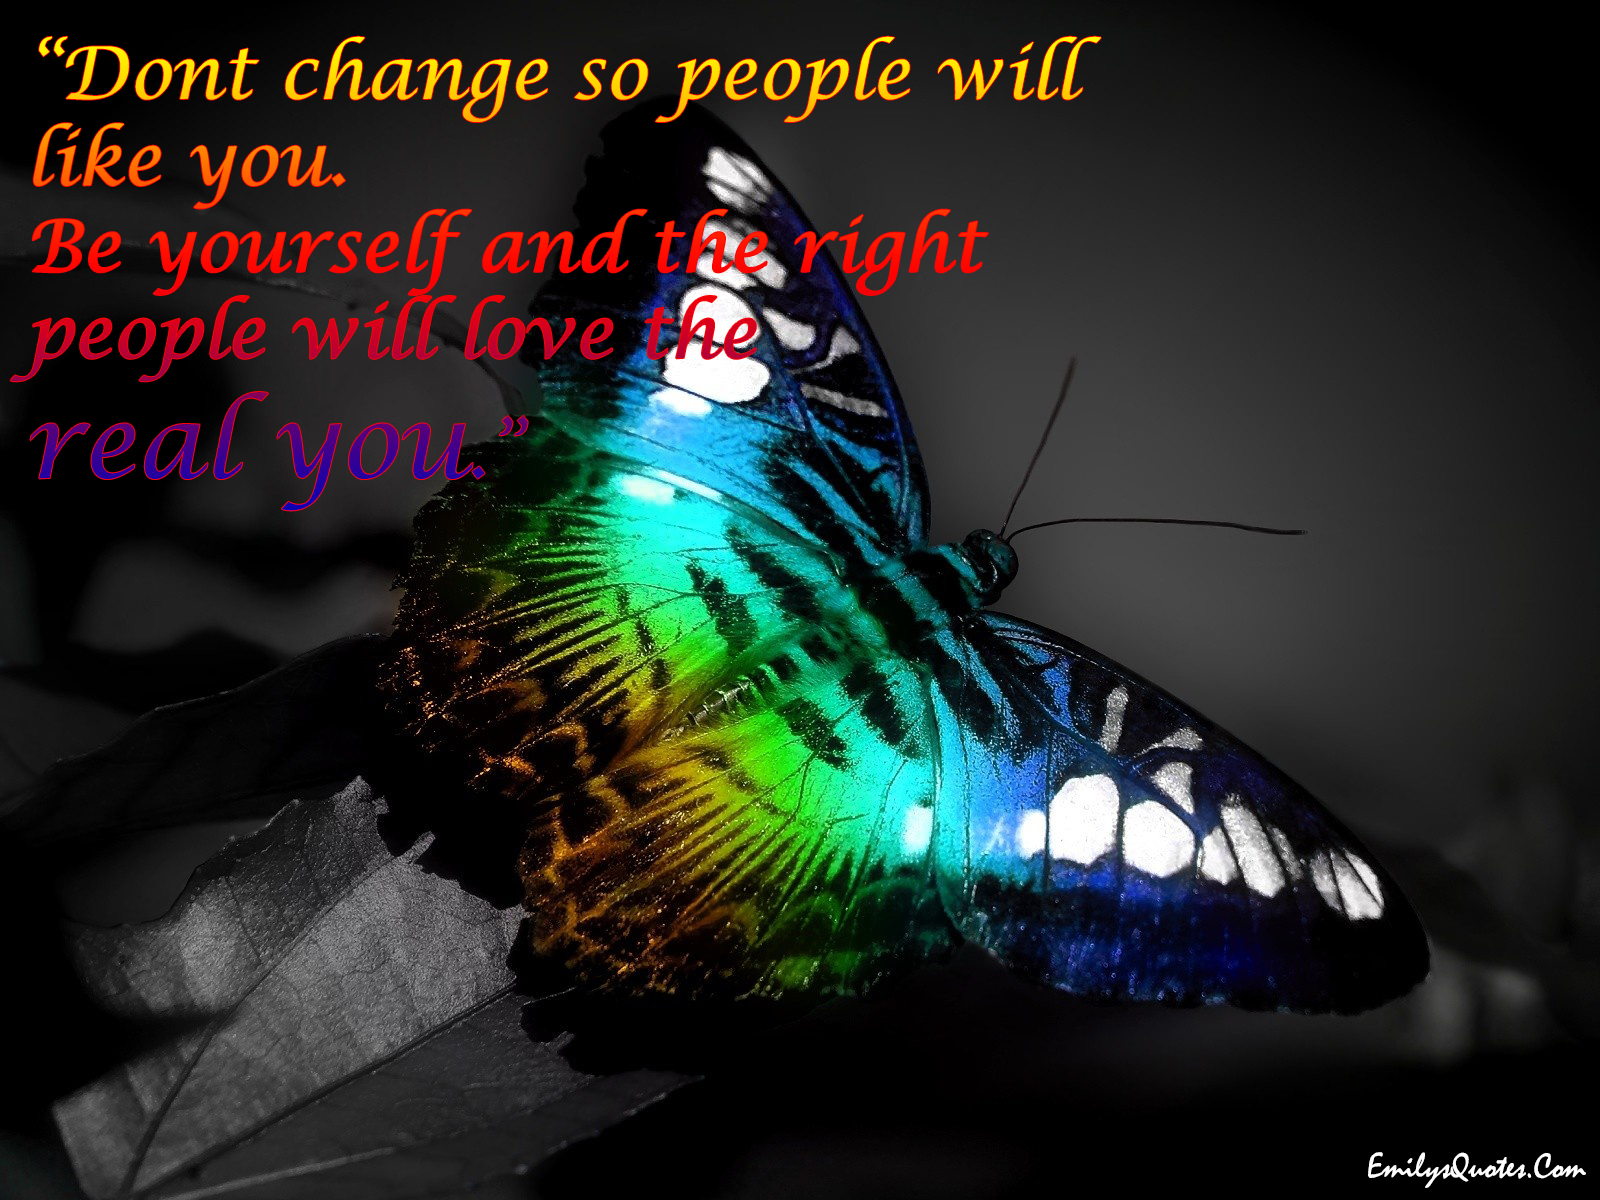 Don’t change so people will like you. Be yourself and the right people will love the real you